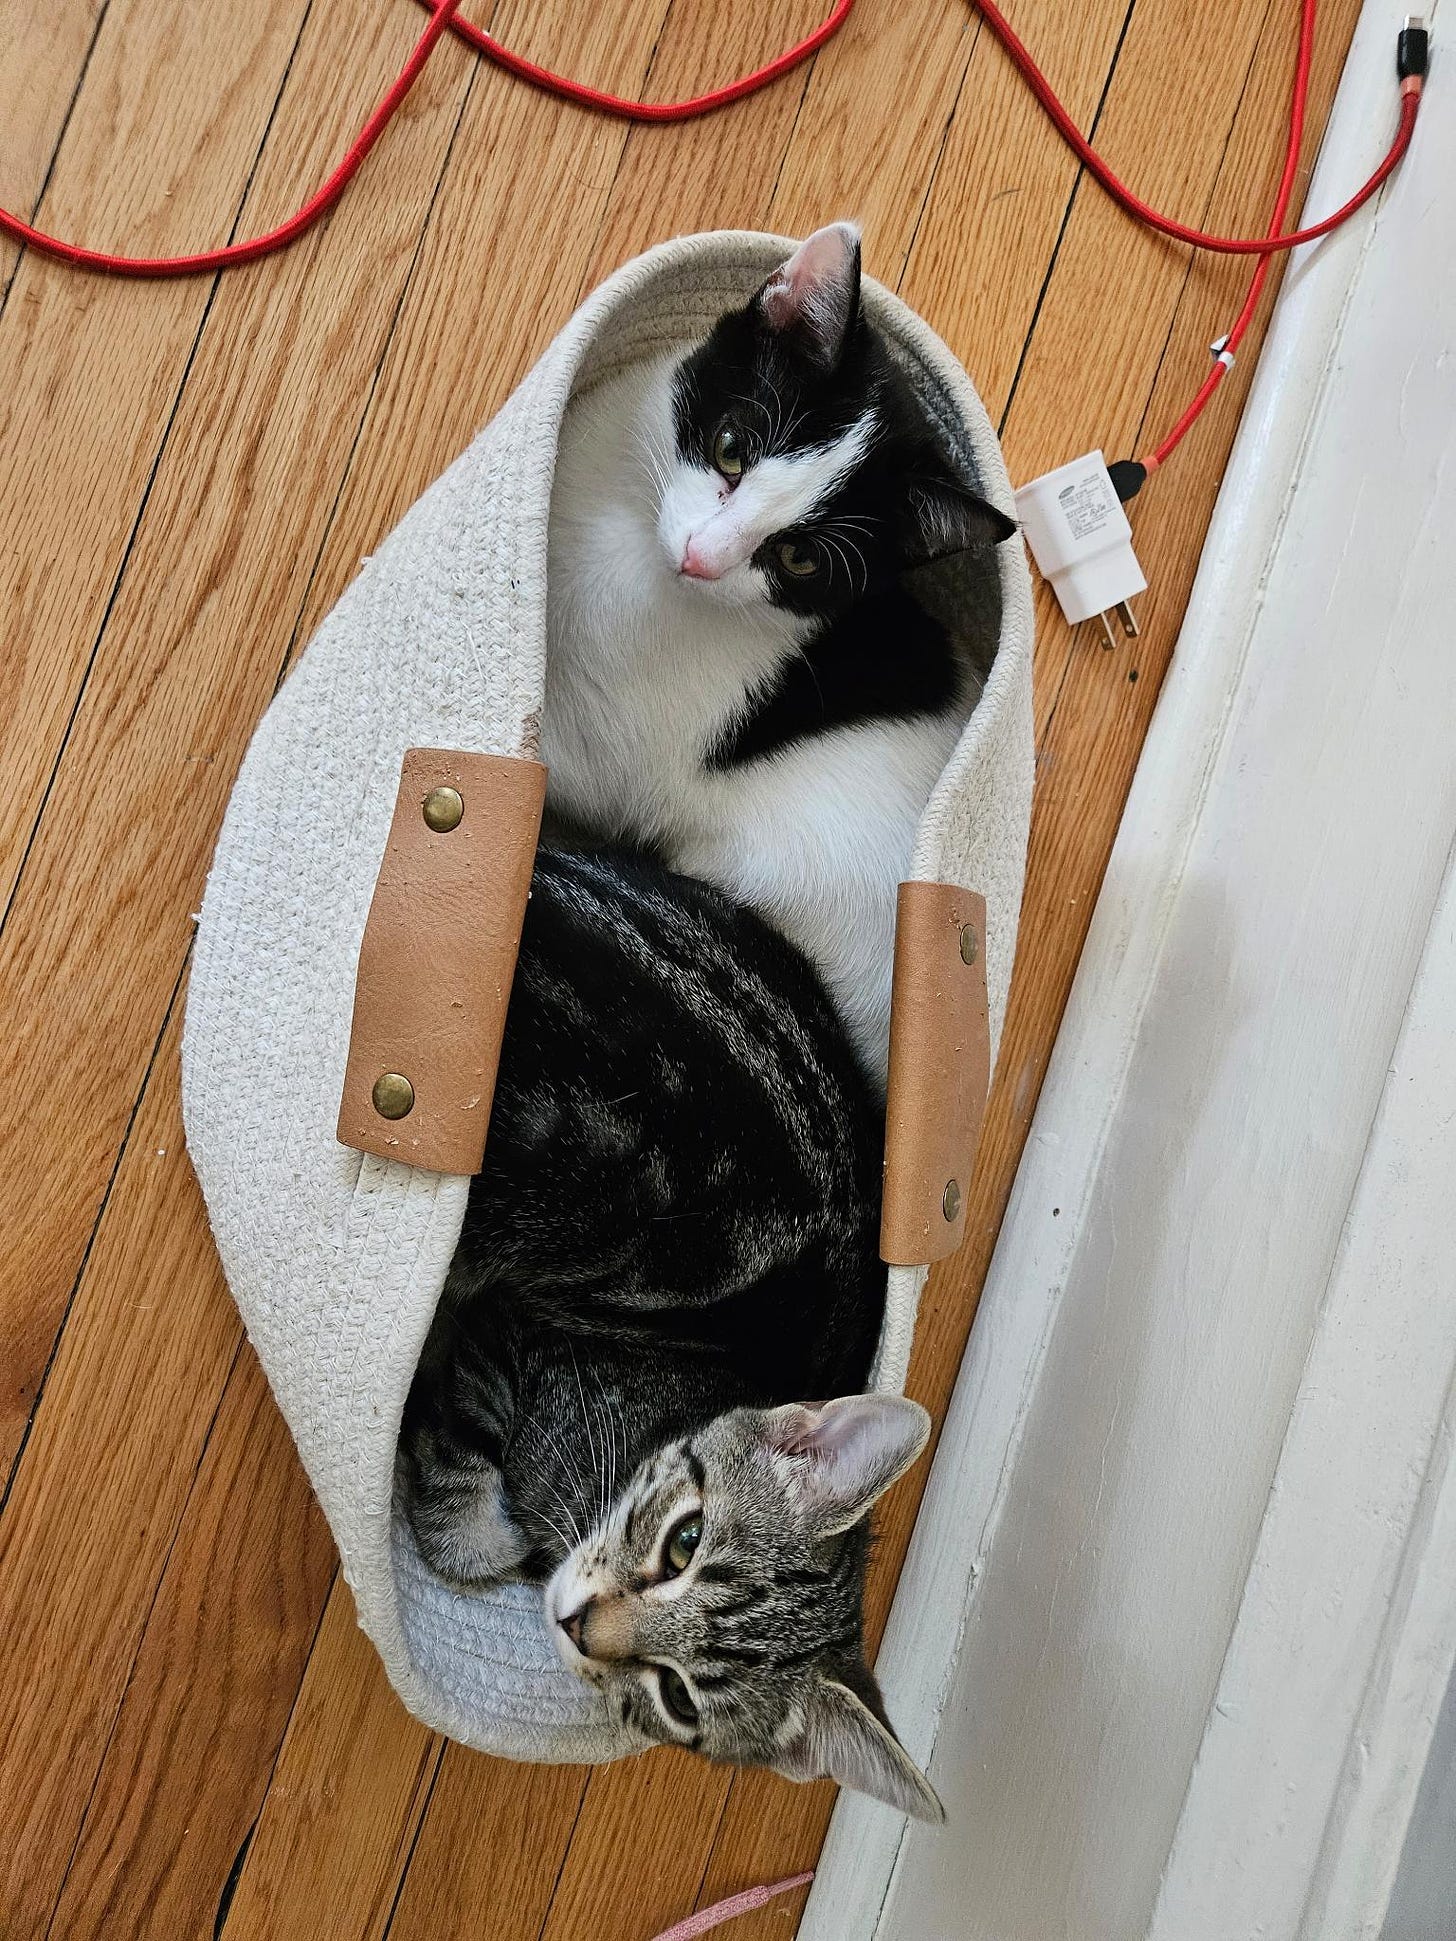 Two cats cuddling with each other in a fabric basket